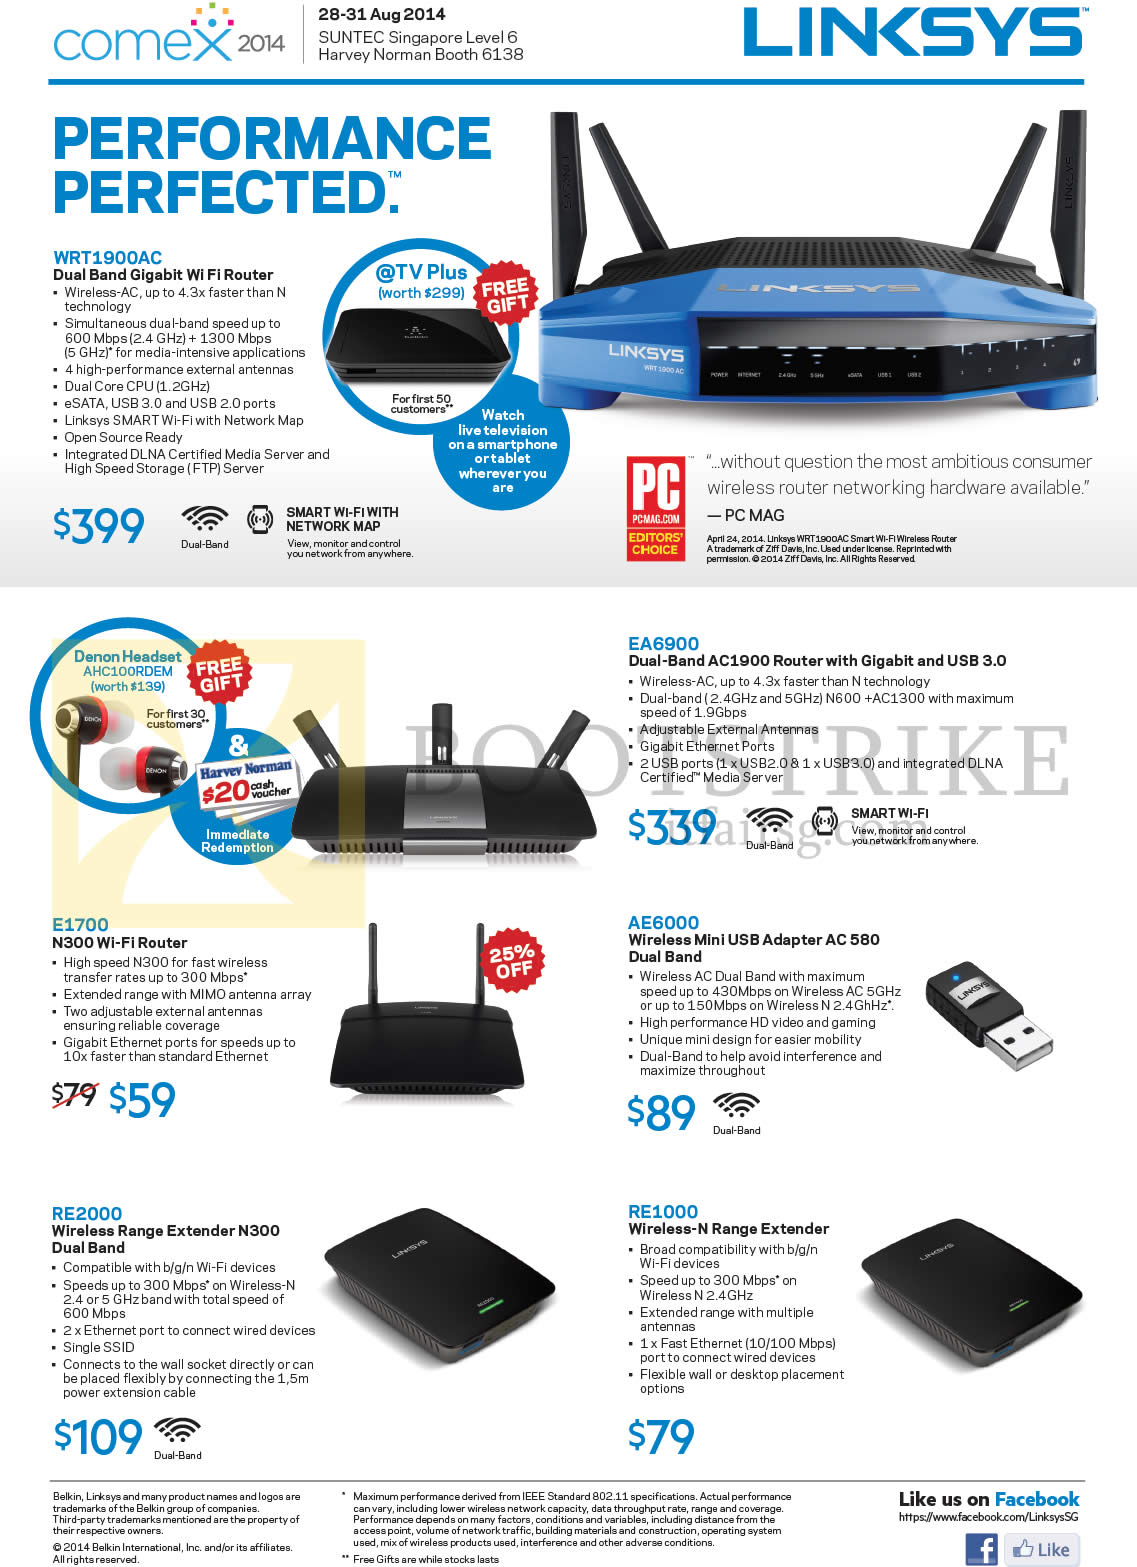 COMEX 2014 price list image brochure of Linksys Networking Wireless Routers, USB Adapter, N-Range Extender, WRT1900AC, E1700, EA6900, AE6000, RE1000, RE2000